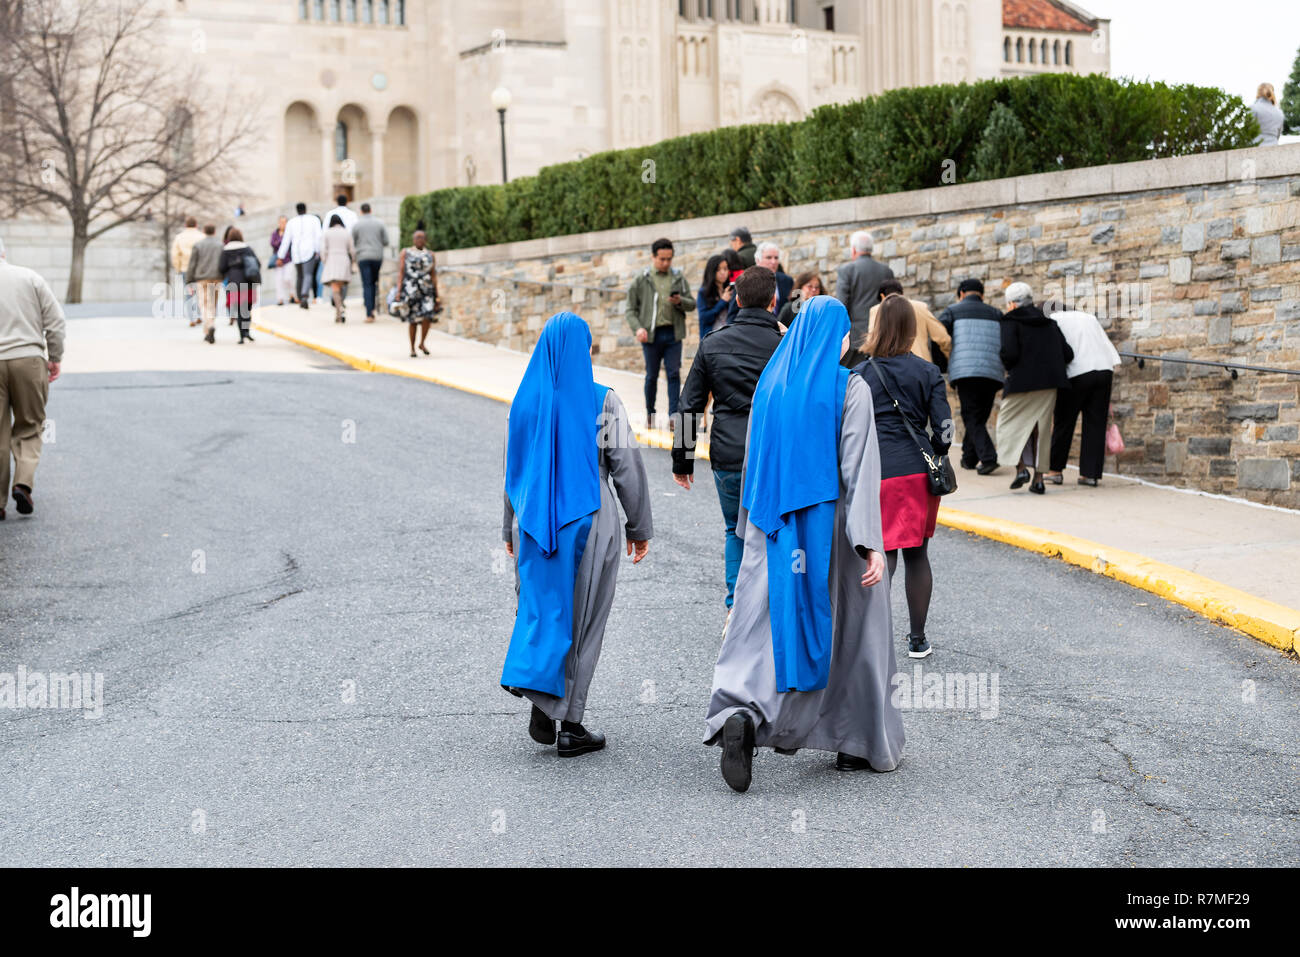 Washington DC, USA - April 1, 2018: People blue nuns walking by the basilica of the National Shrine of the Immaculate Conception Catholic church stree Stock Photo